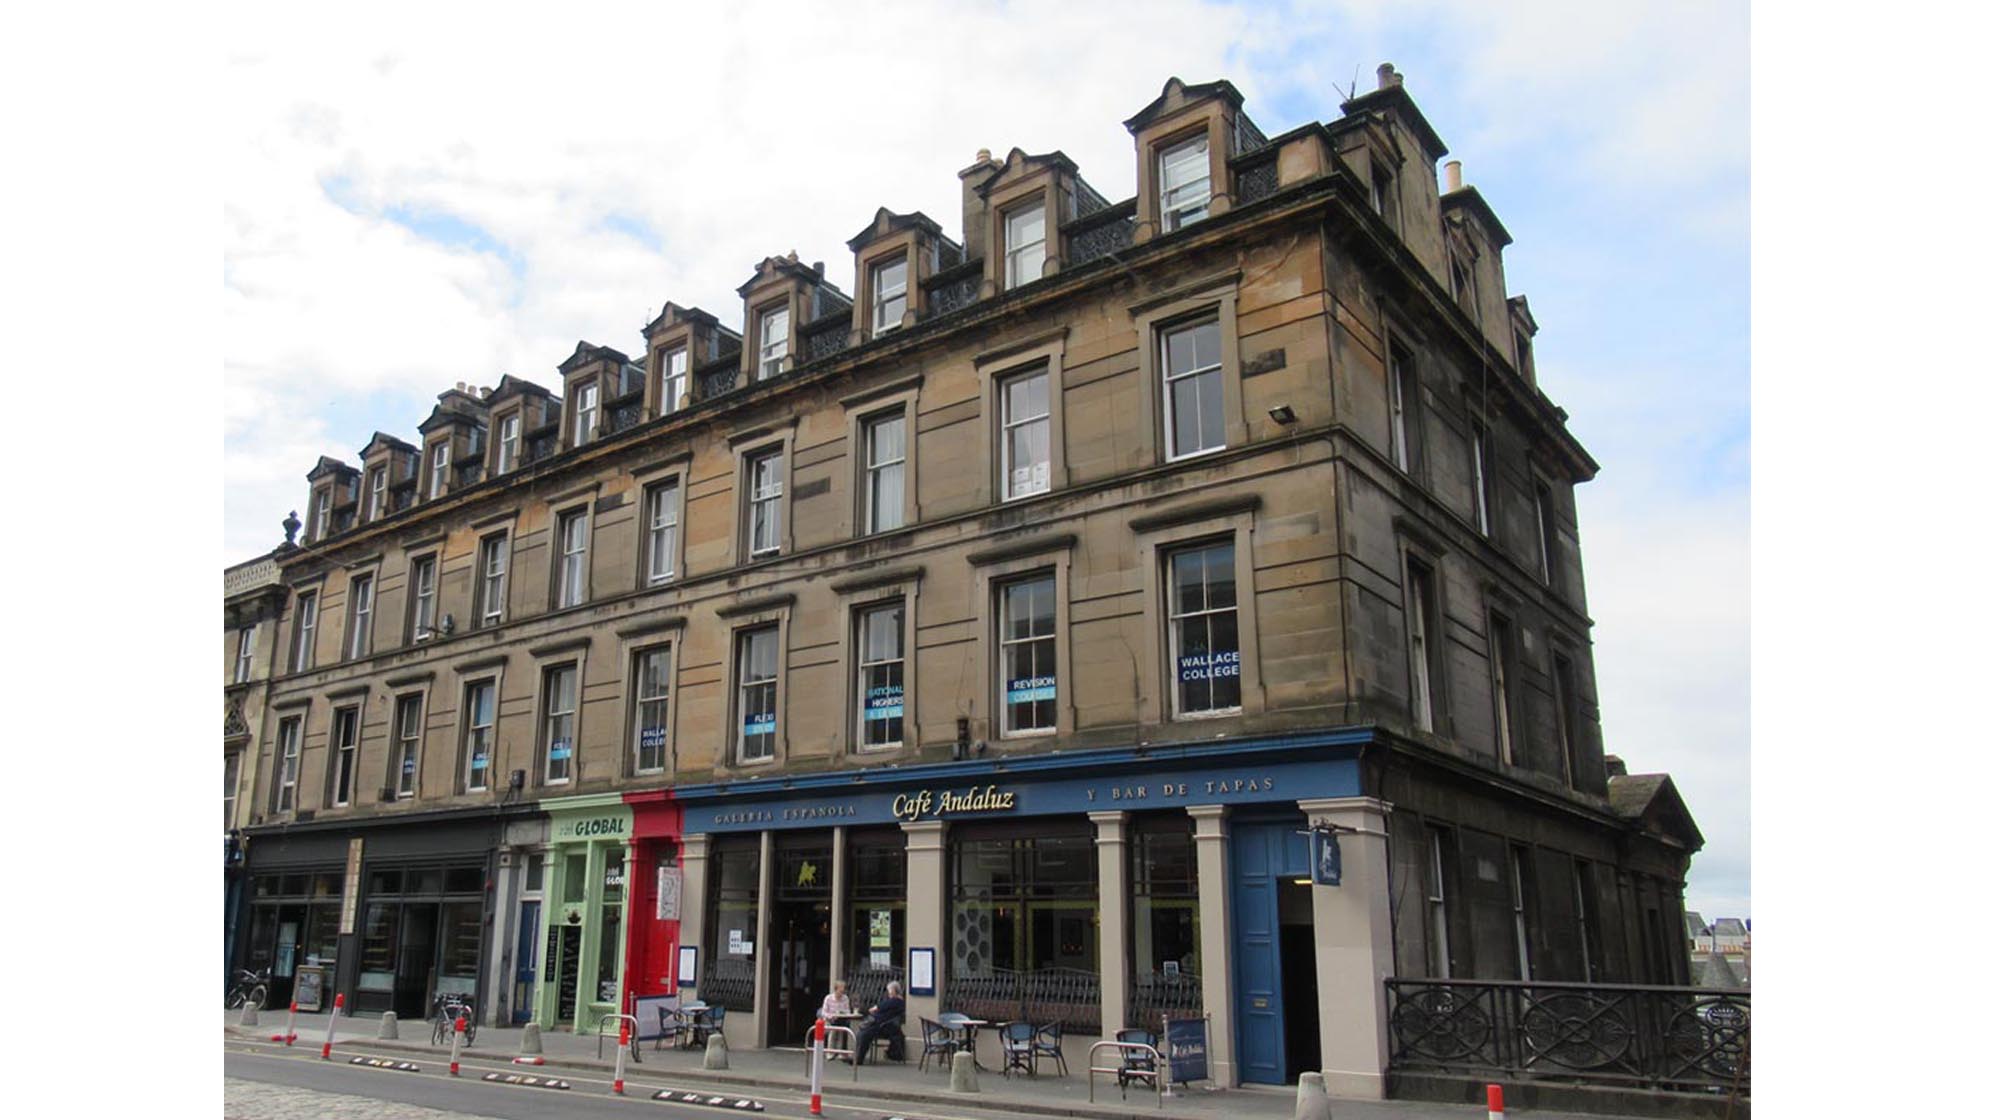 George IV Bridge Aparthotel: Planning Submitted{categories}, {category_name}{/categories}